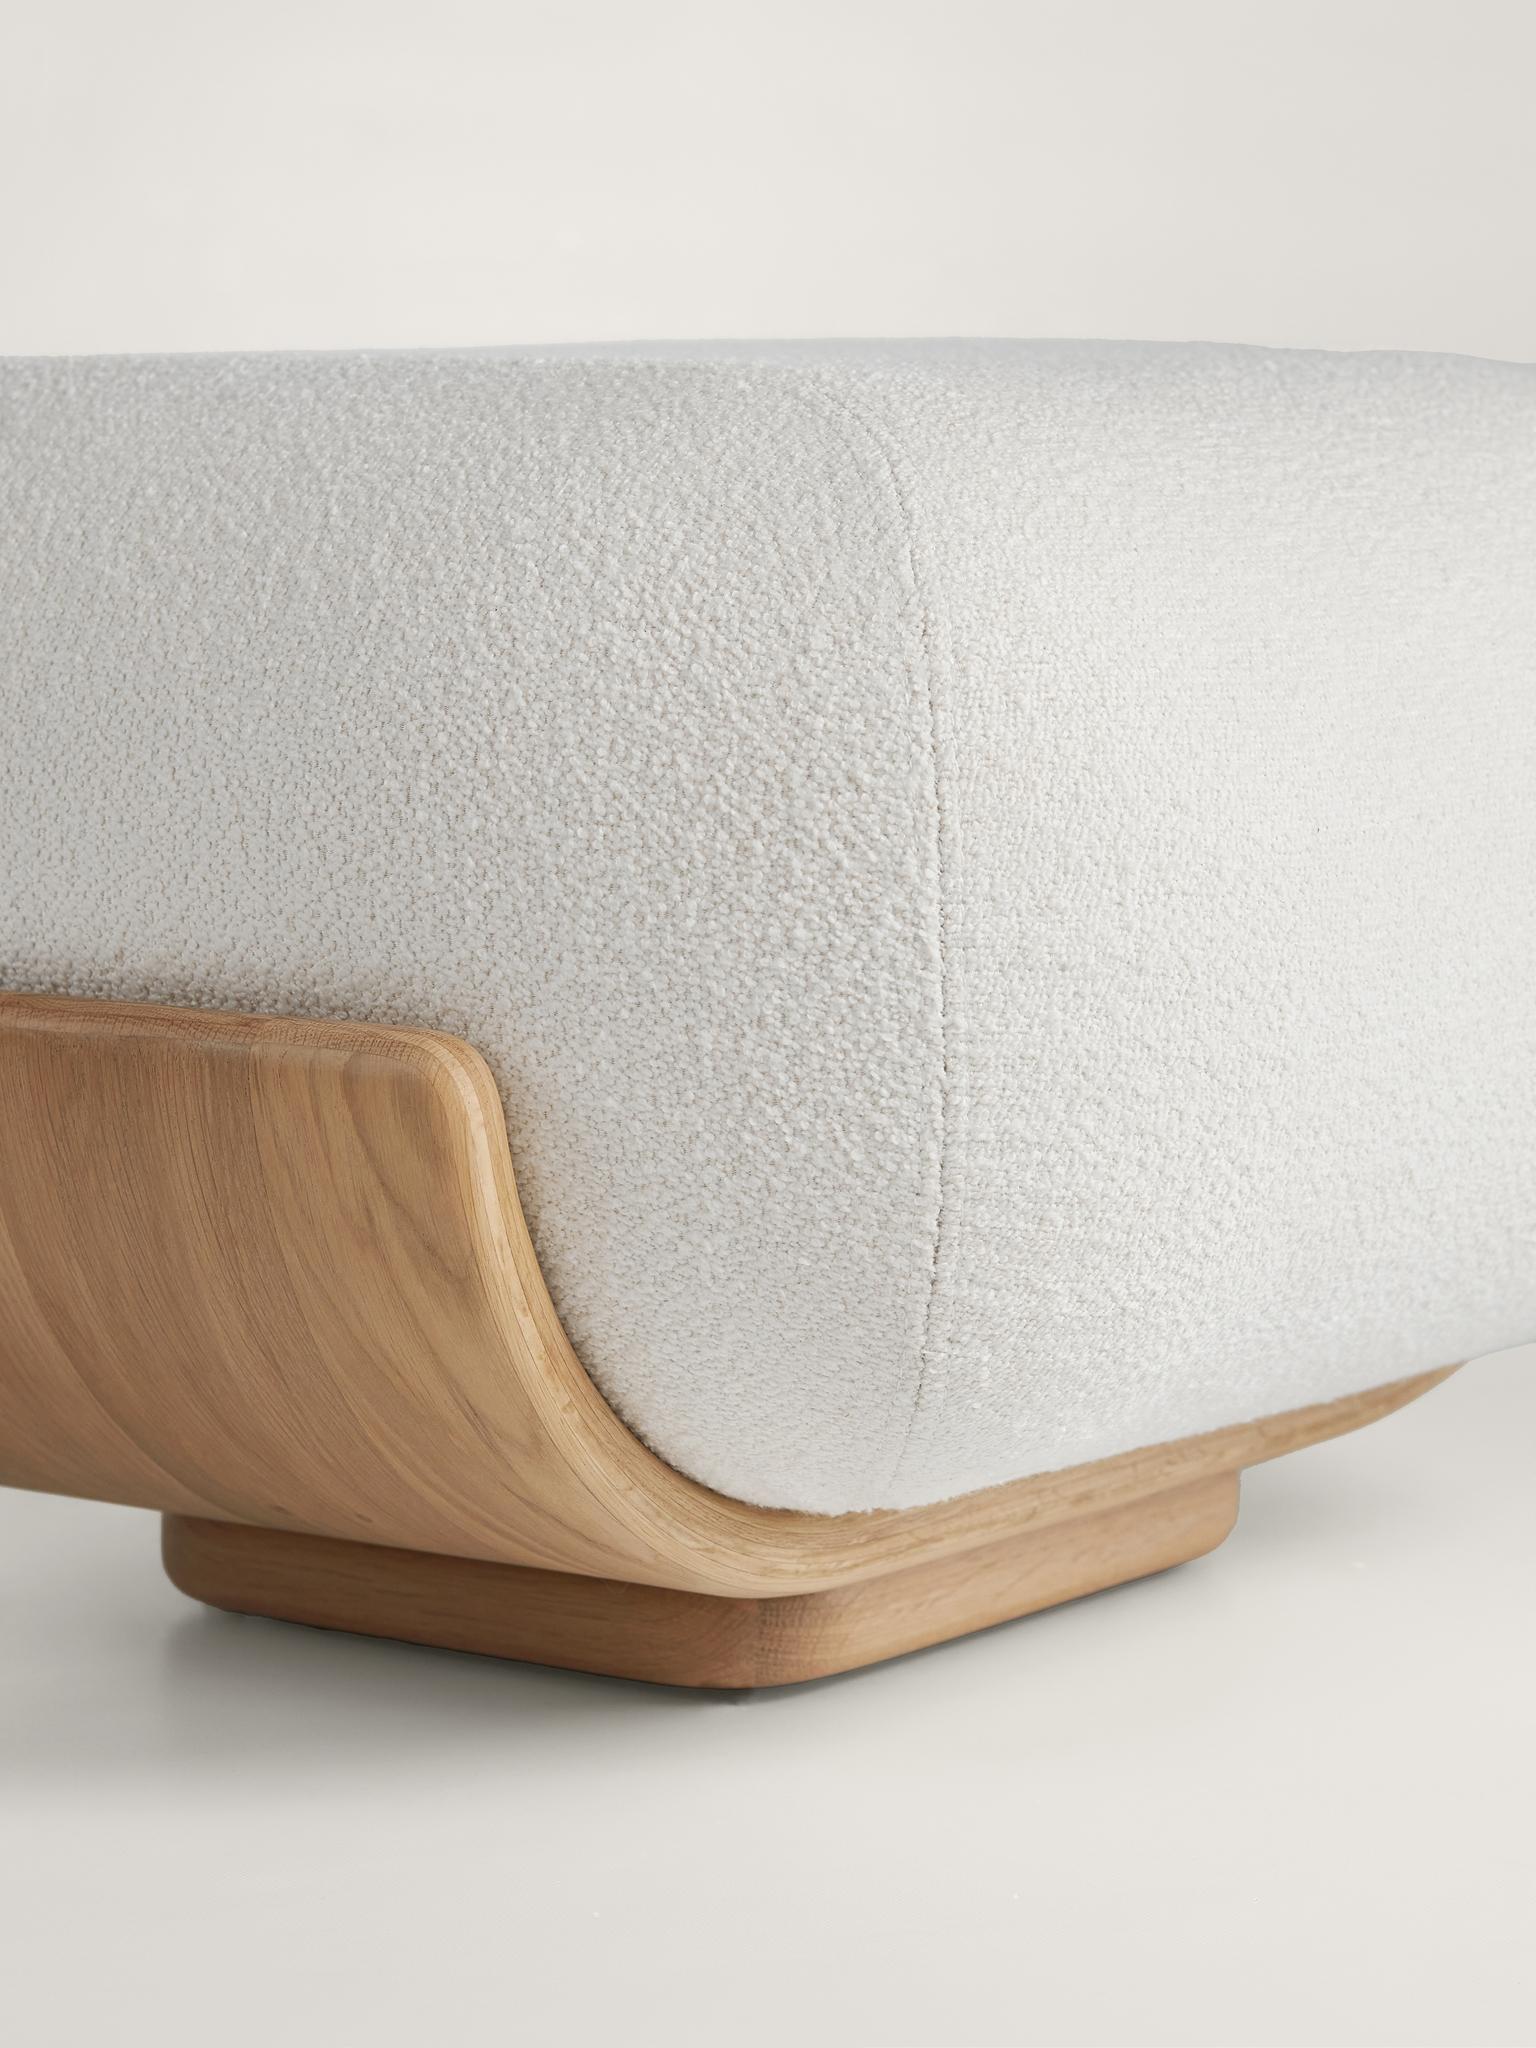 Romanian Cannoli Ottoman by Arbore x Studio PHAT For Sale